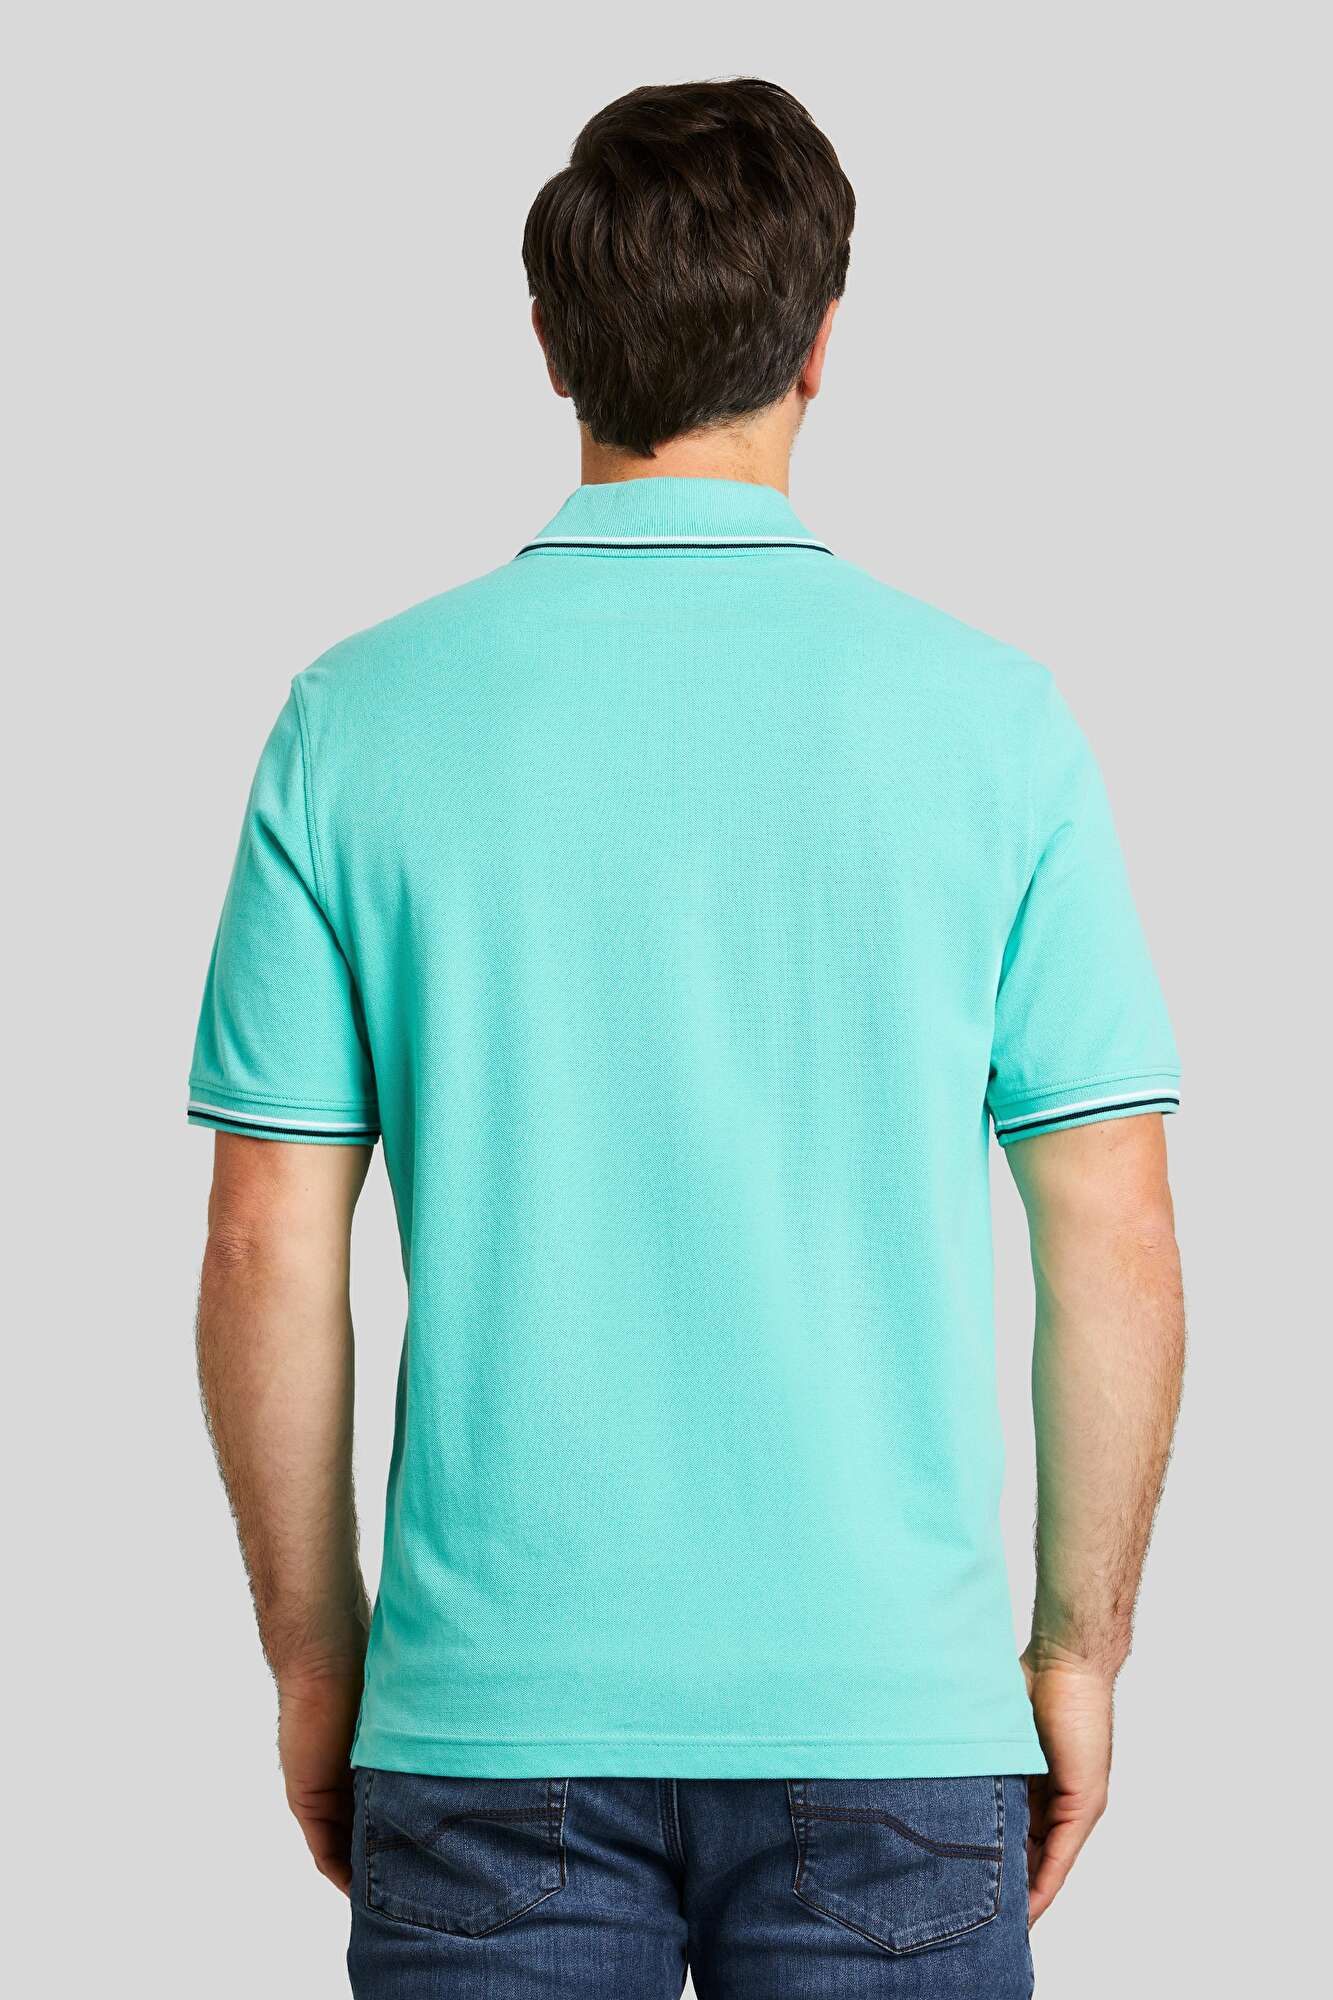 Pique polo with cuffs shirt bugatti in mint and sleeve on stripes contrasting collar | the